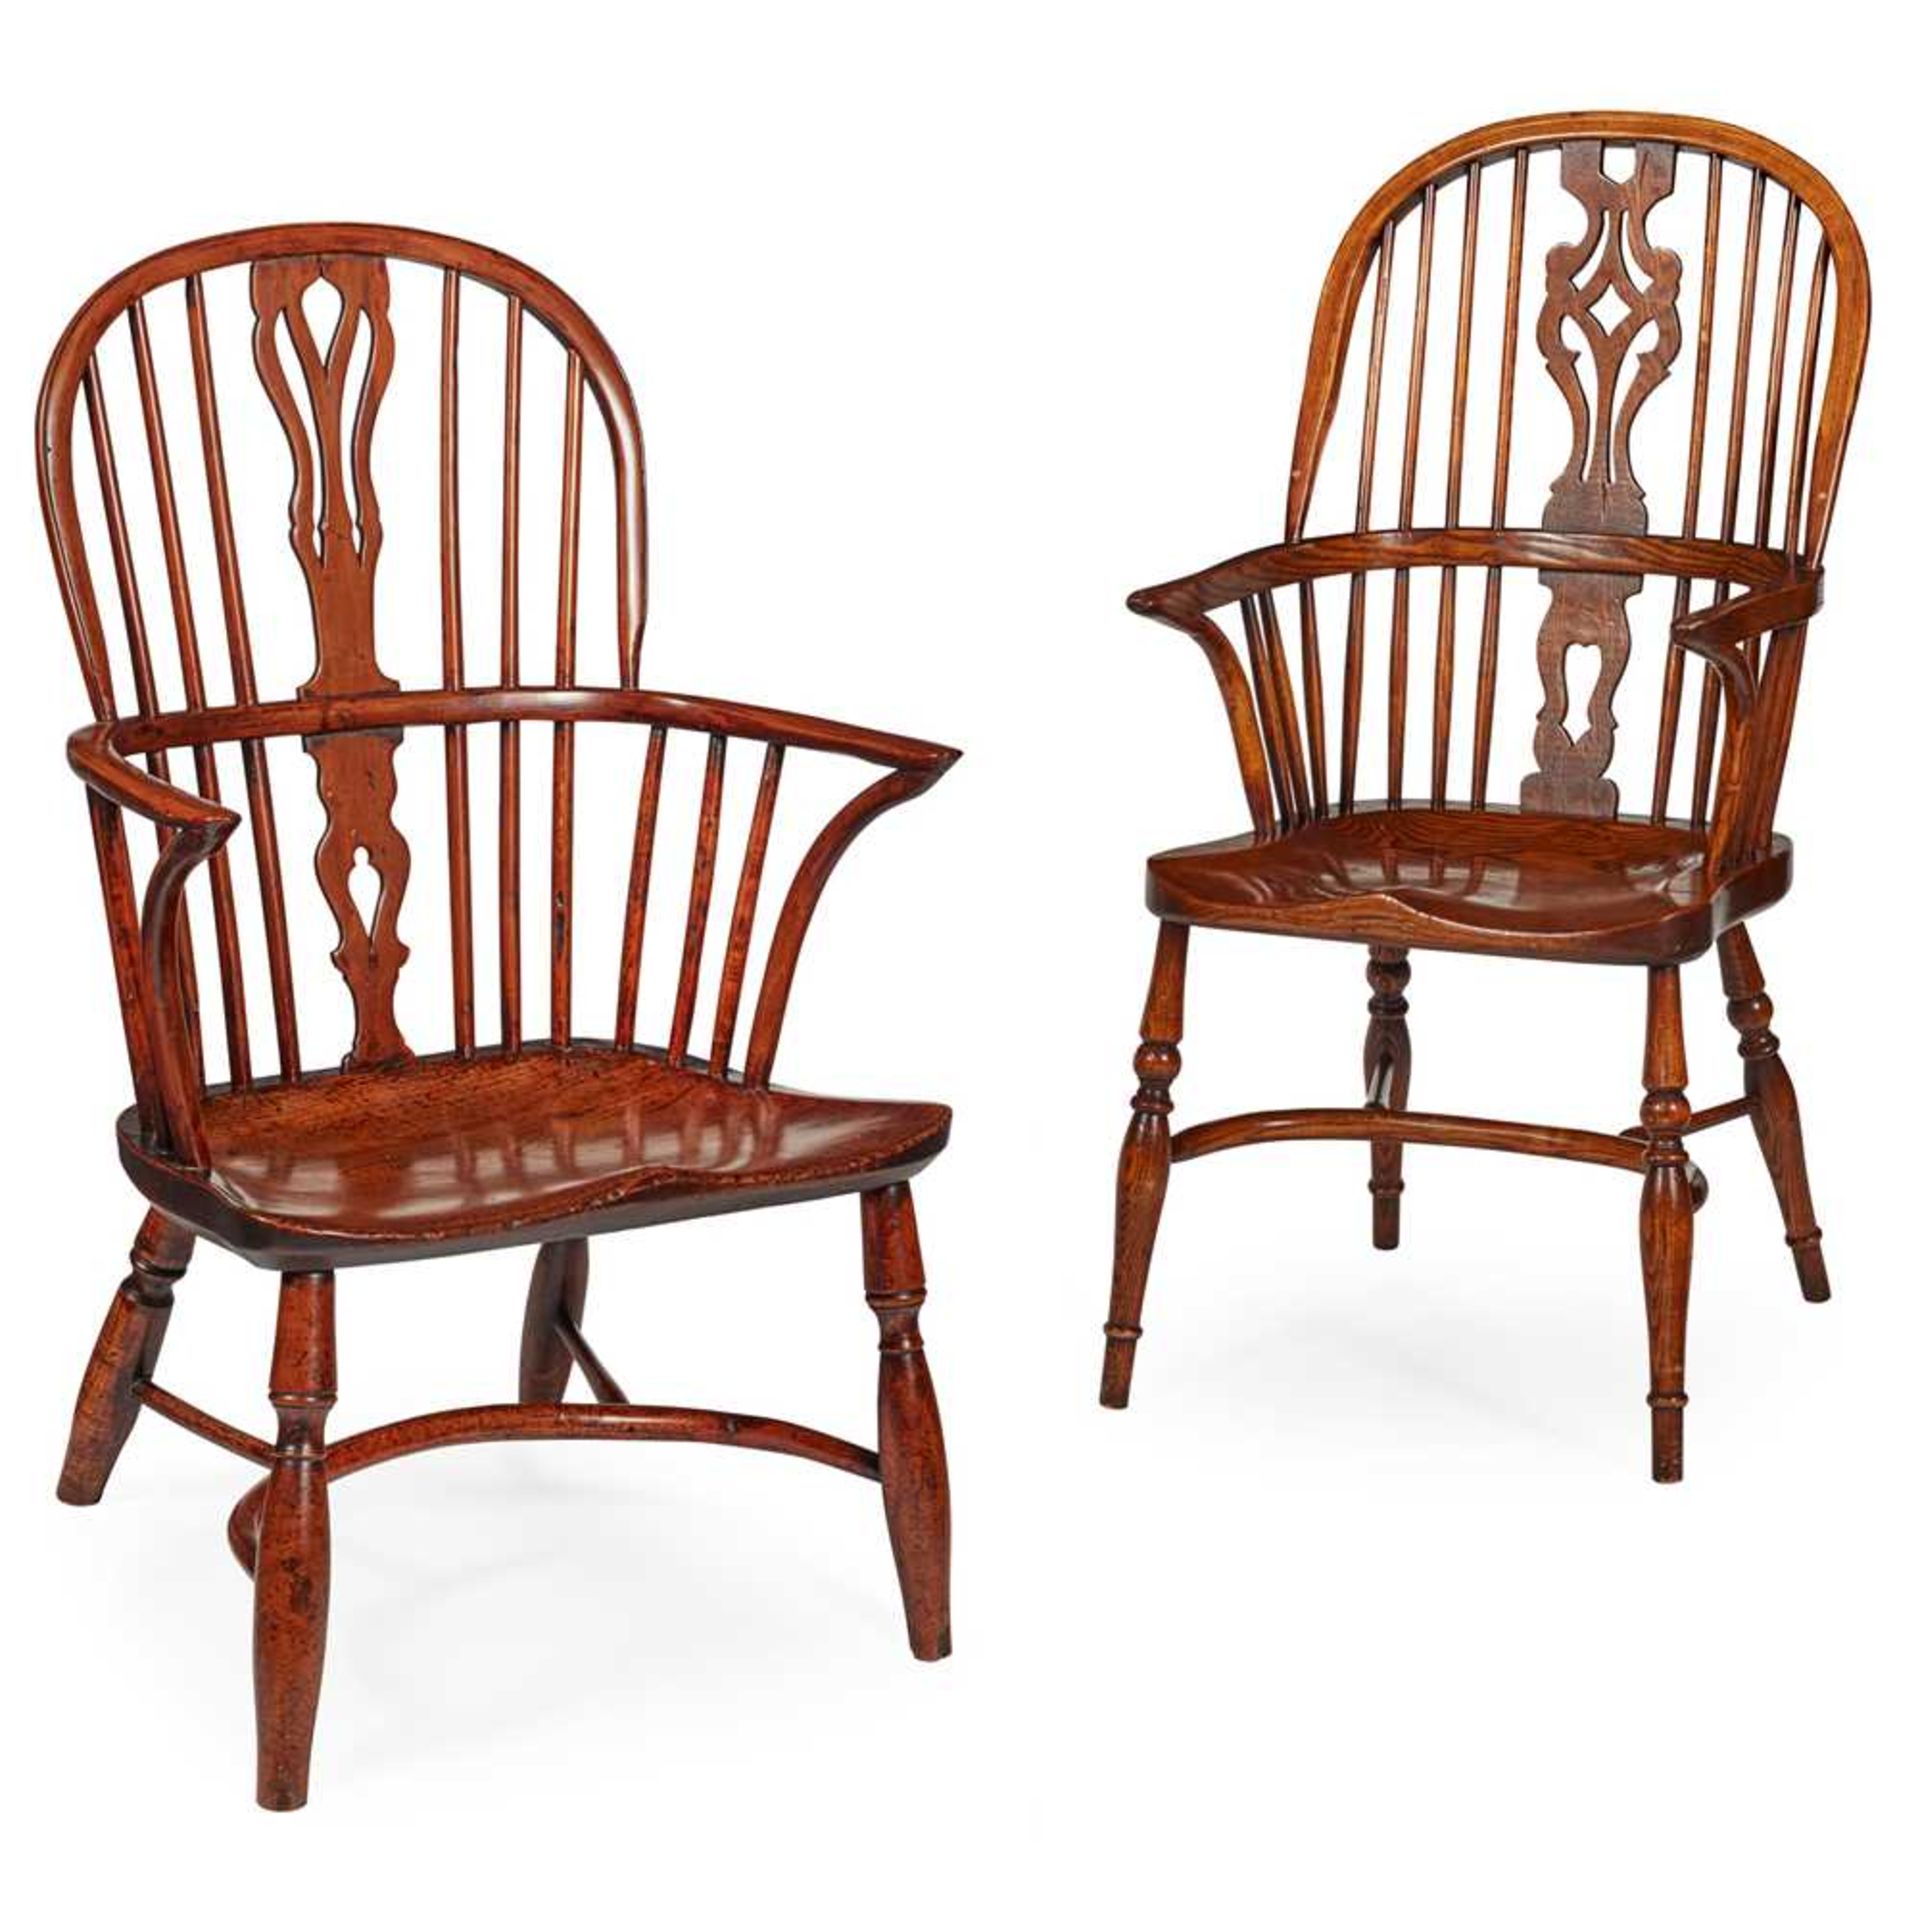 TWO WINDSOR ARMCHAIRS 19TH CENTURY